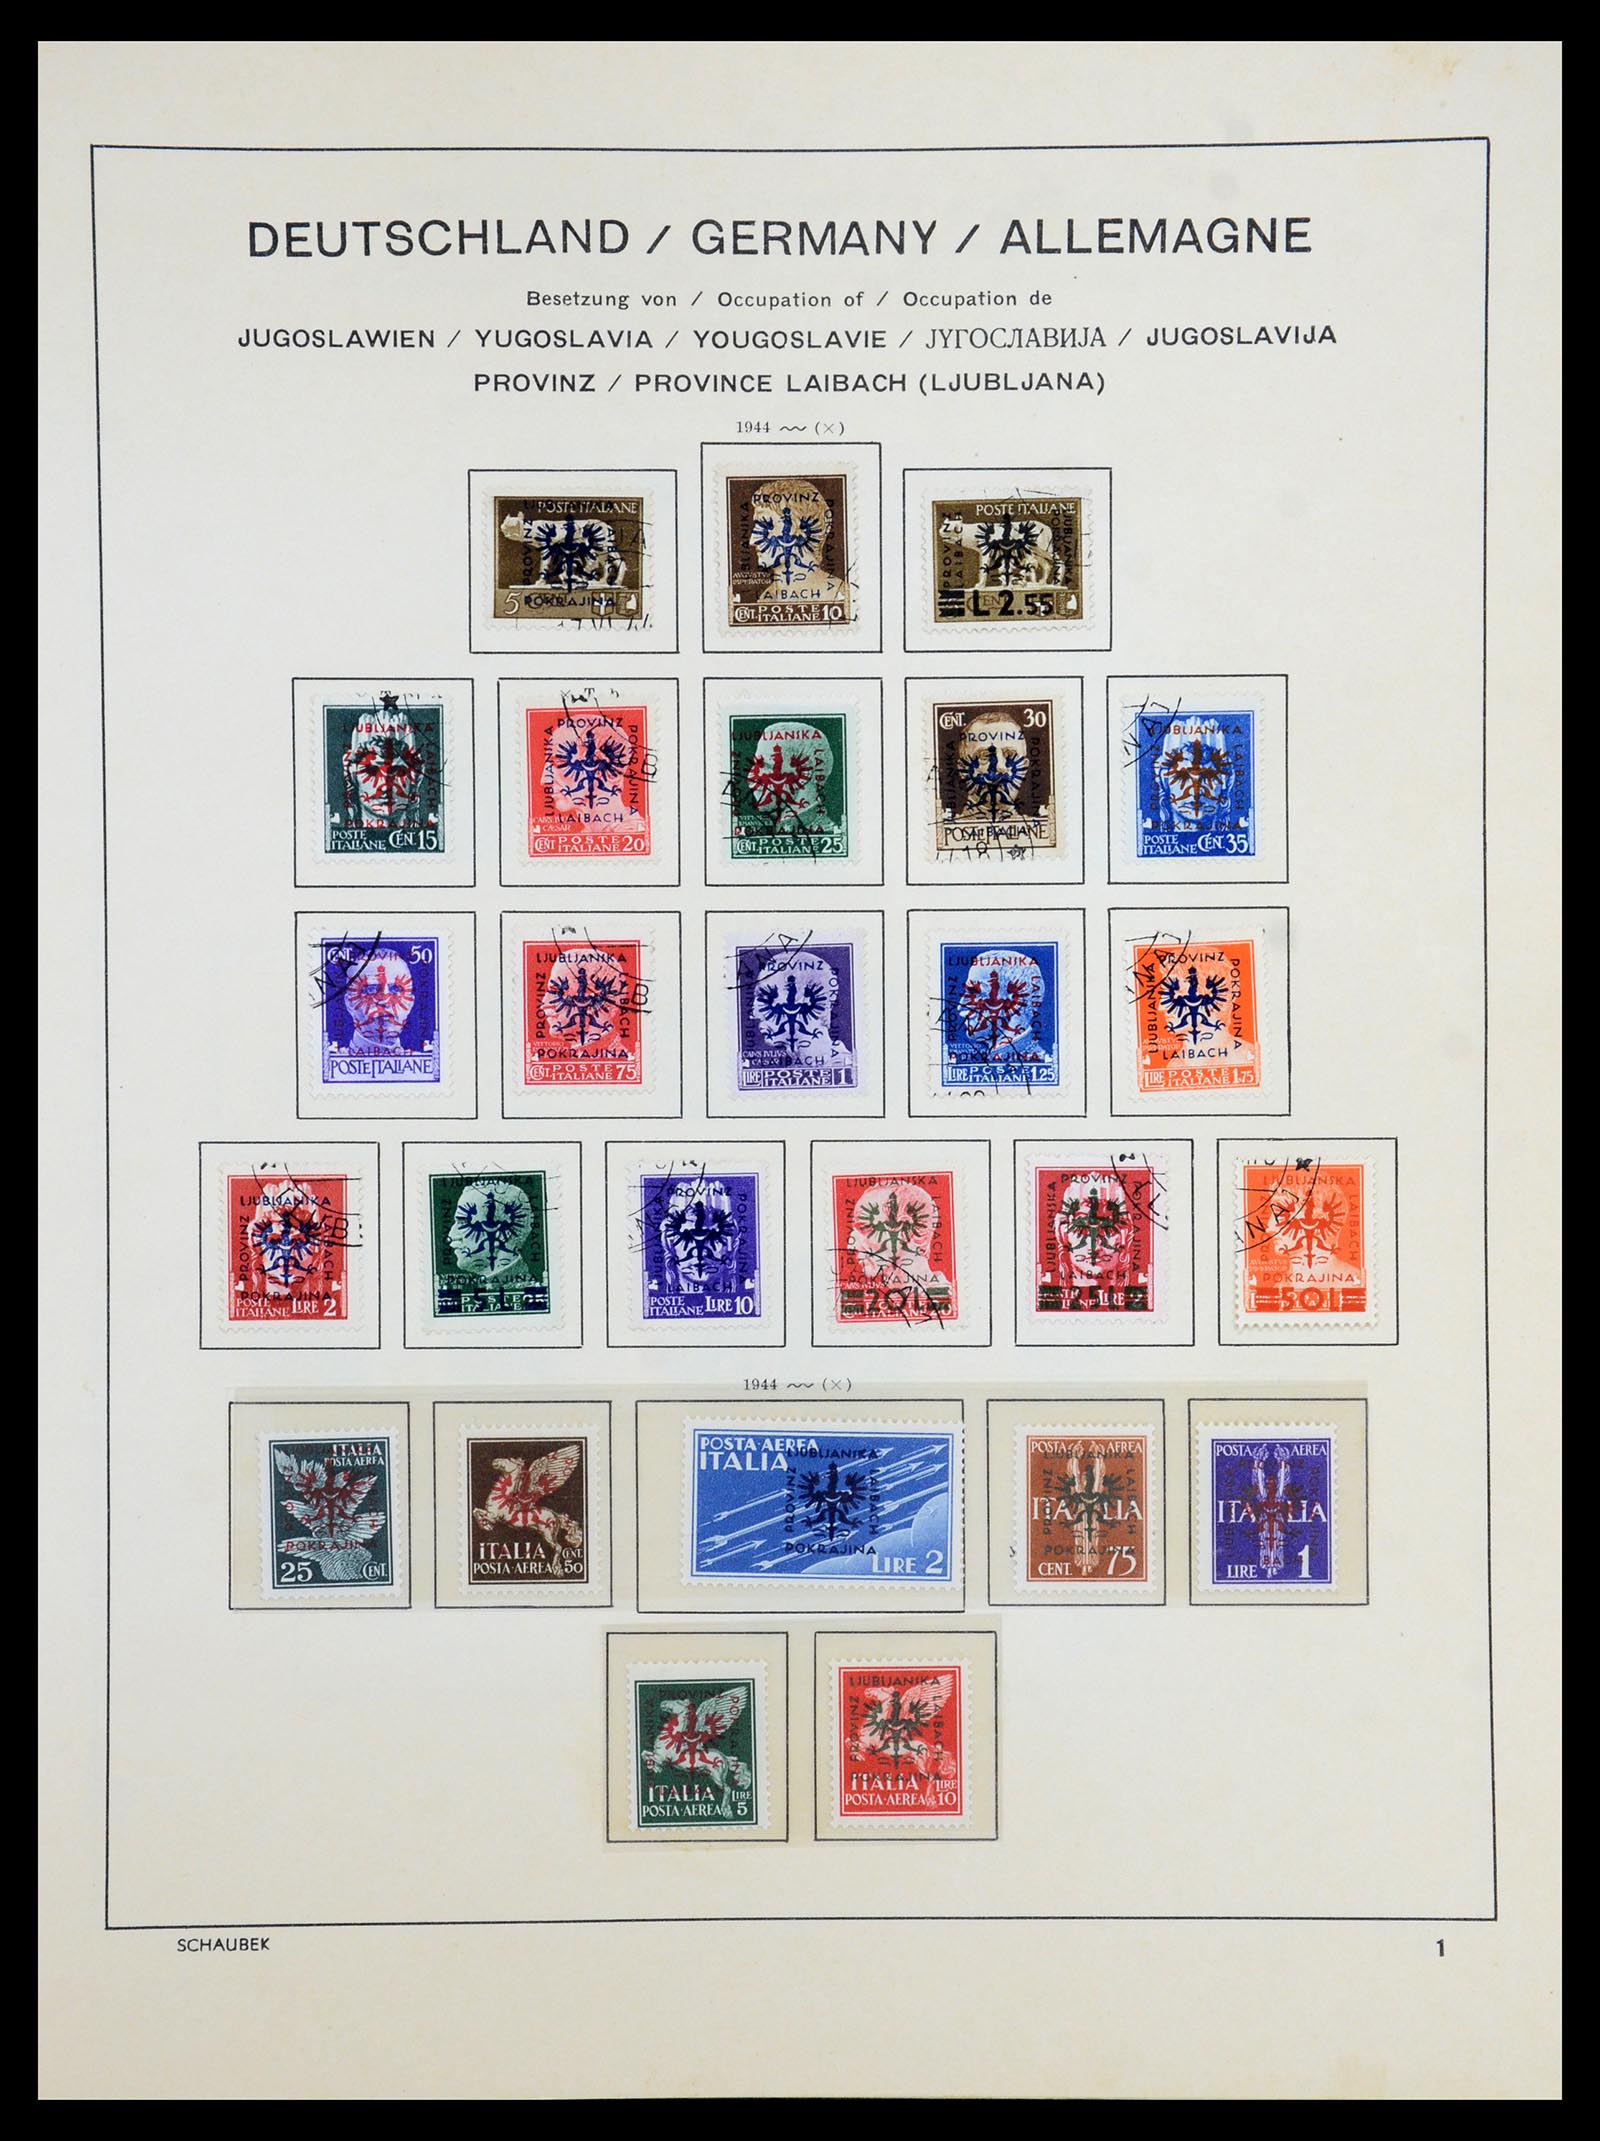 35964 040 - Stamp collection 35964 Germany occupations WW II 1939-1945.